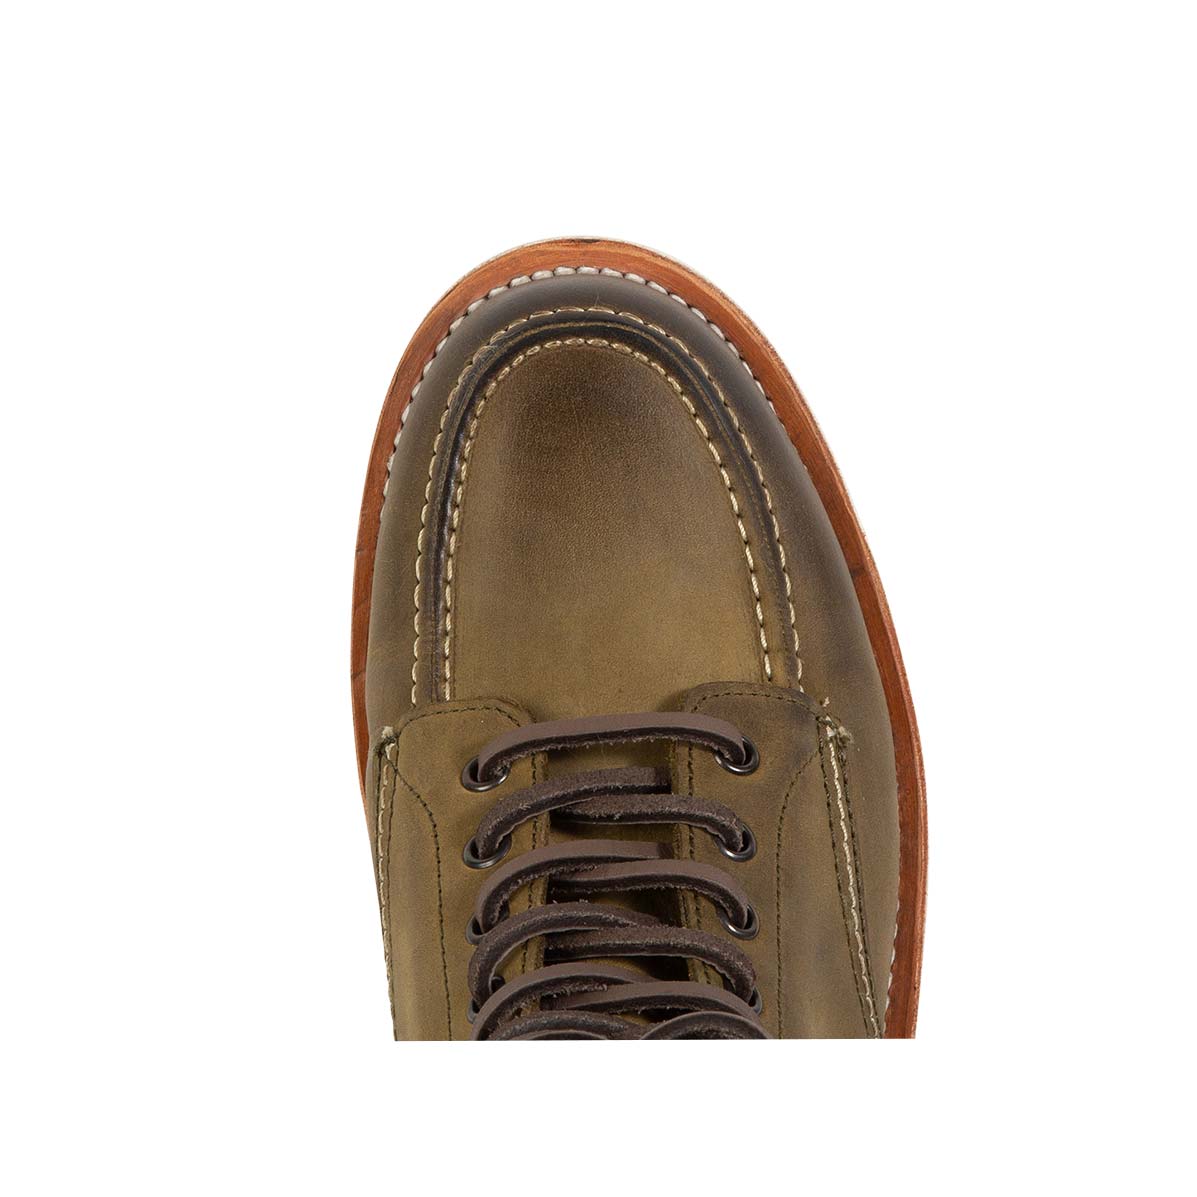 Top view showing round toe and leather lacing on FREEBIRD men's Carbon olive shoe